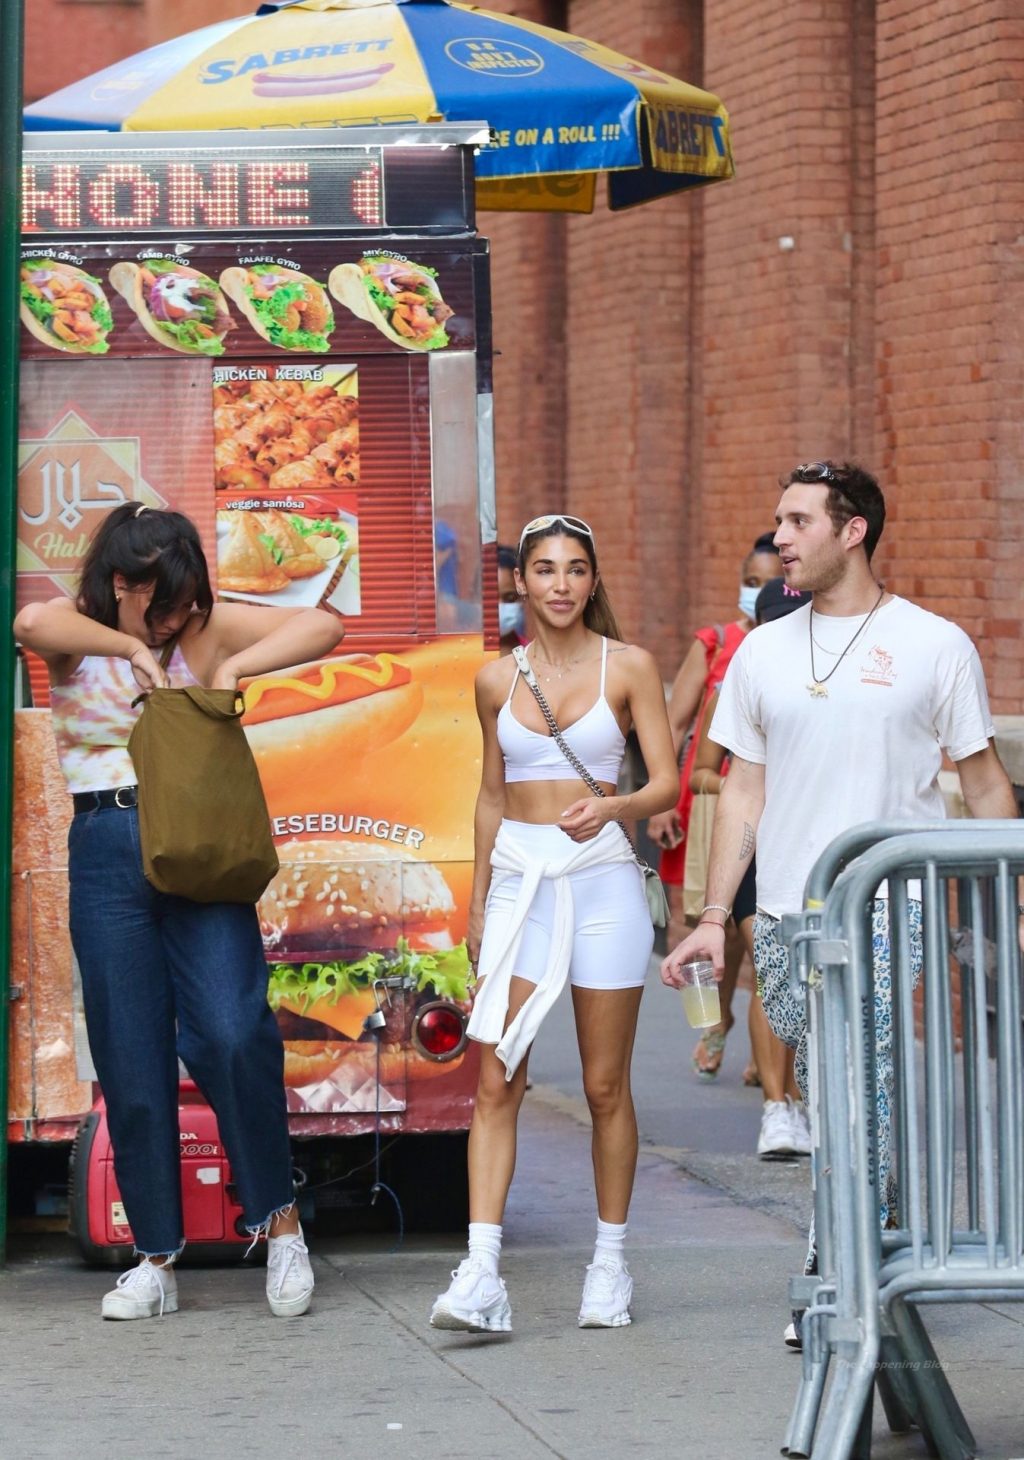 Chantel Jeffries is Seen Smoking a Suspicious Cigarette While Out and About with Friends in NYC (30 Photos)